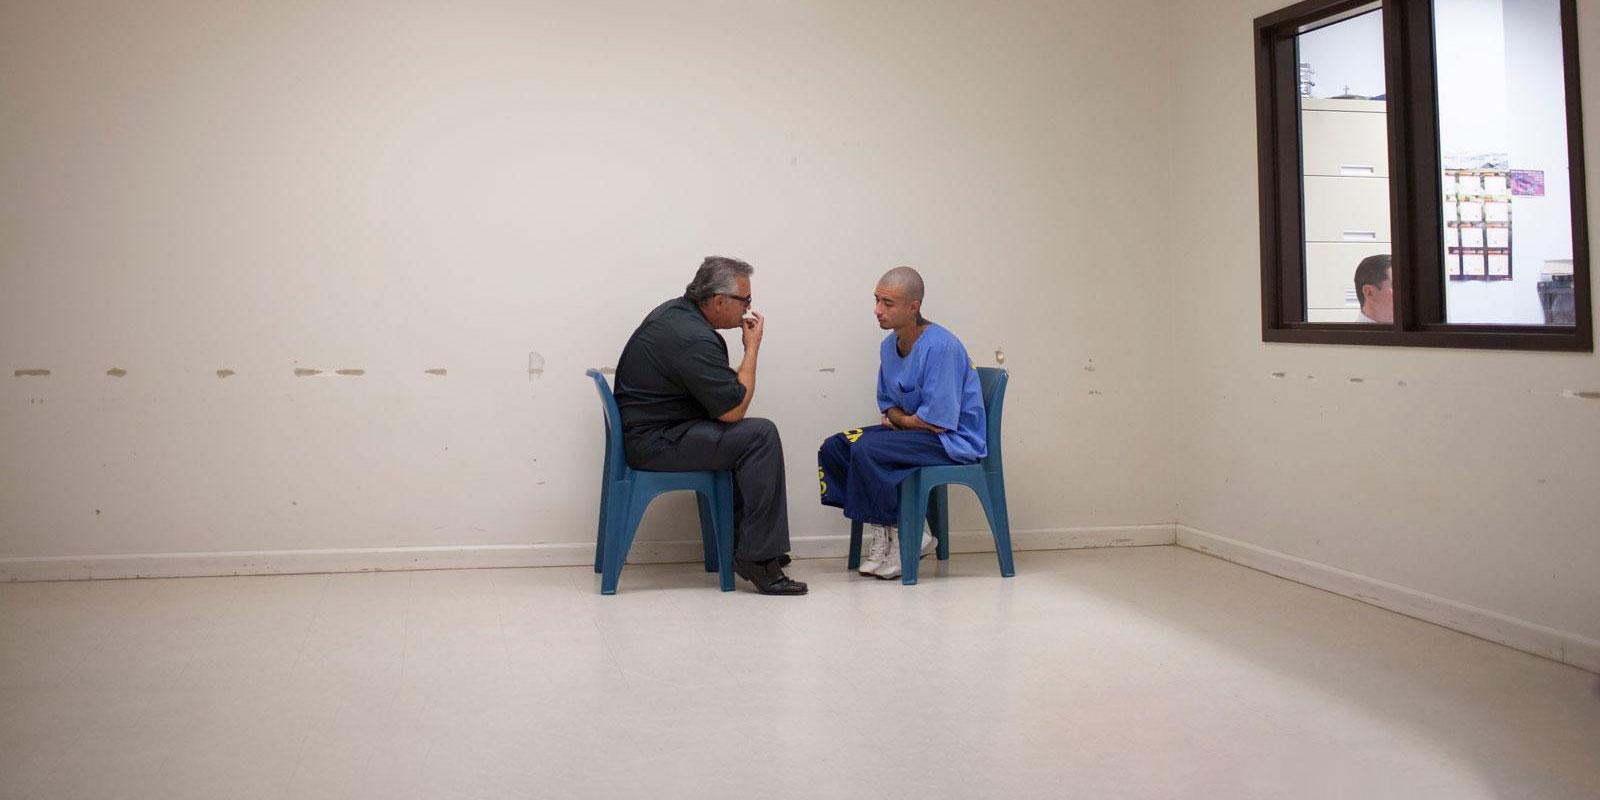 Man and young inmate sitting talking on plastic chairs under fluorescent lights.